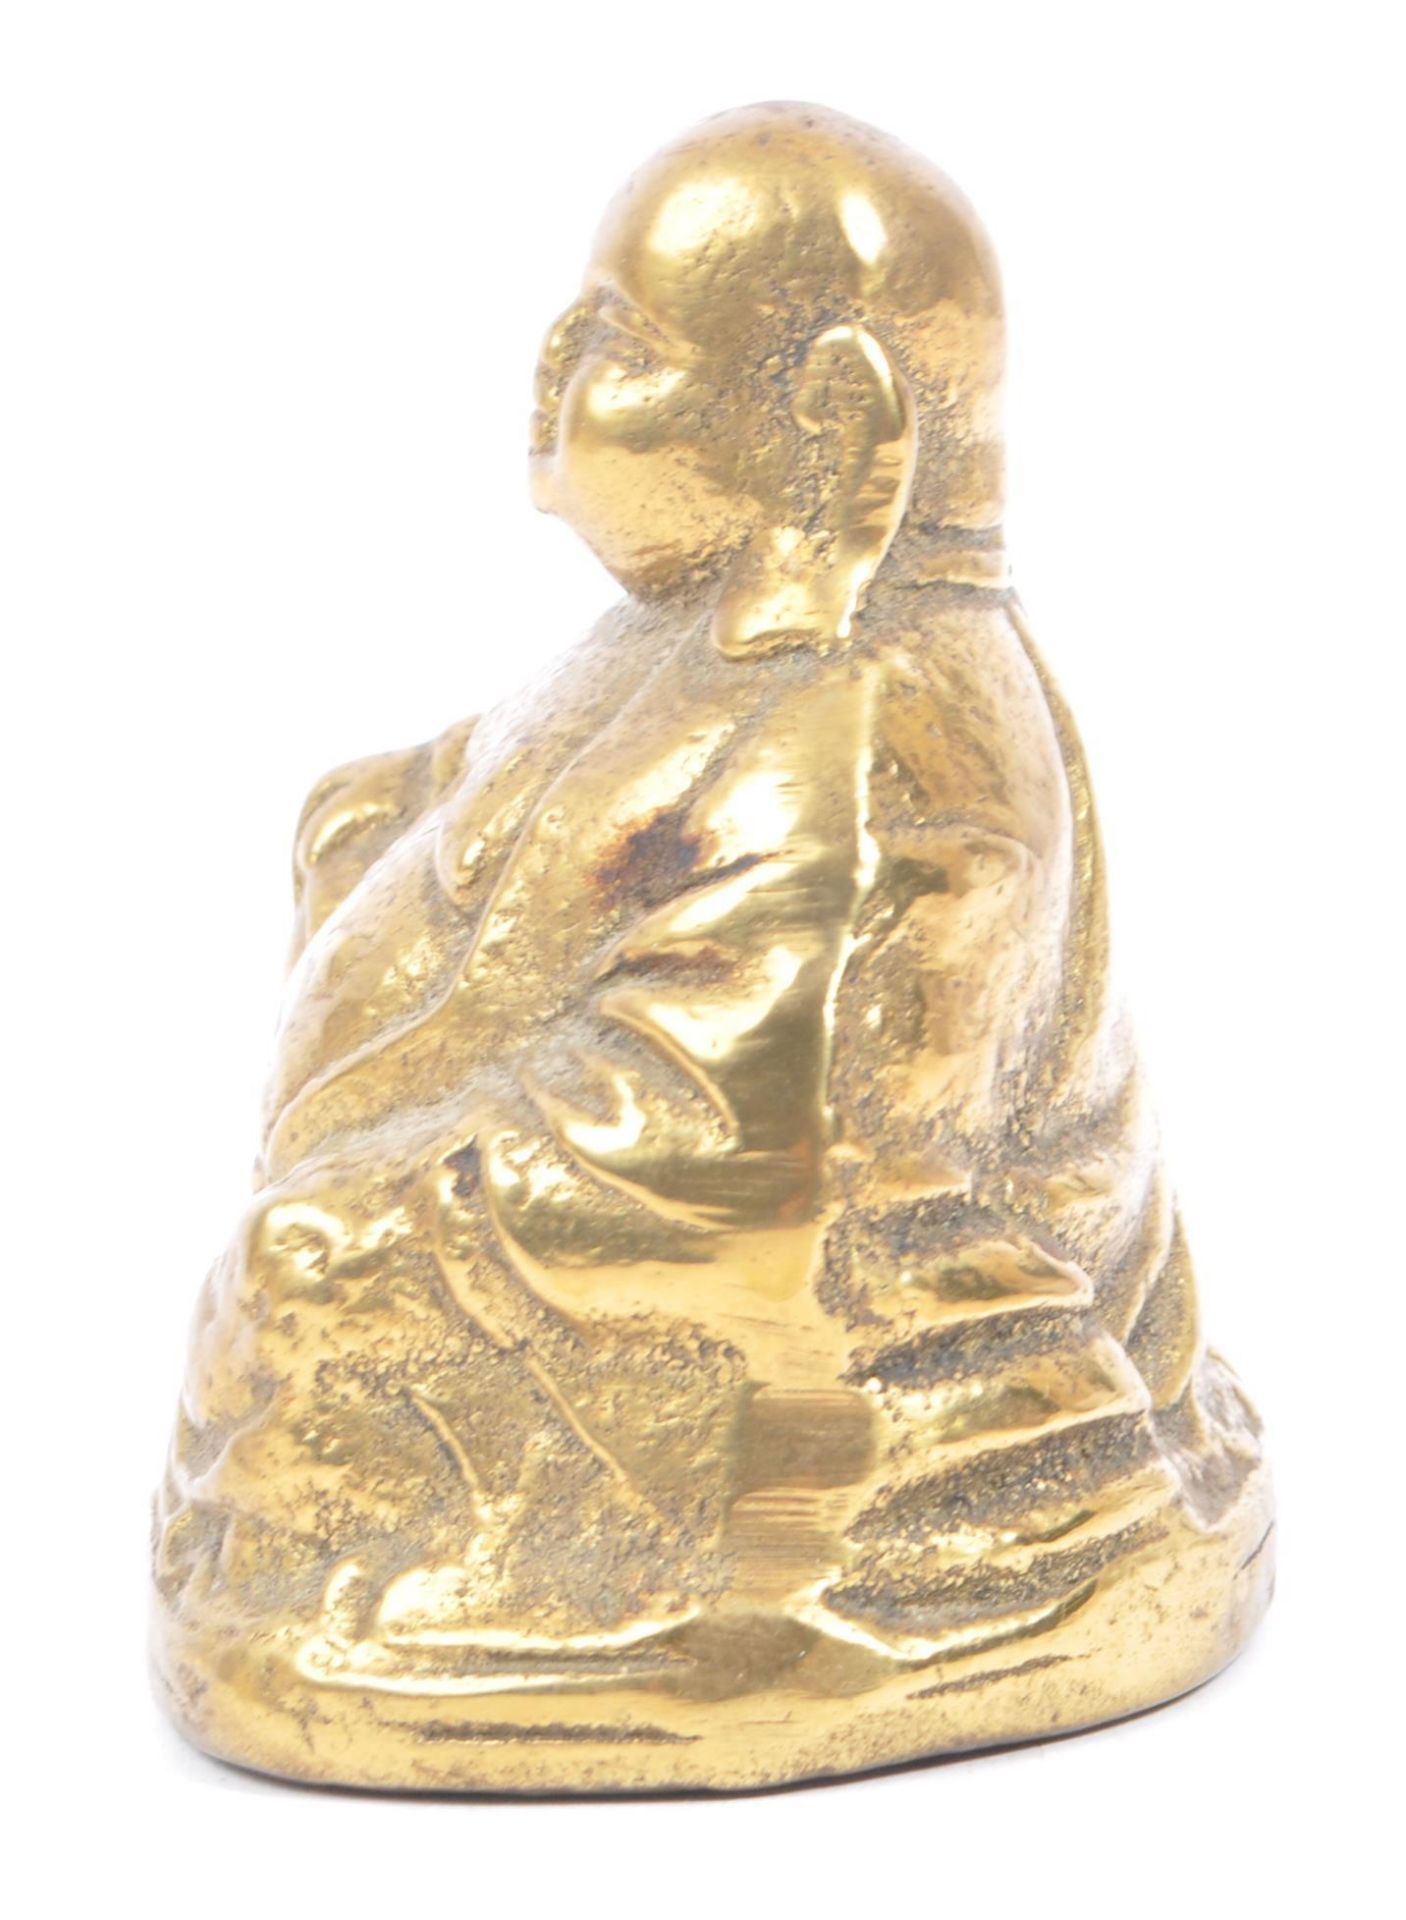 CHINESE EARLY 20TH CENTURY BRASS LAUGHING BUDDHA FIGURE - Image 4 of 6